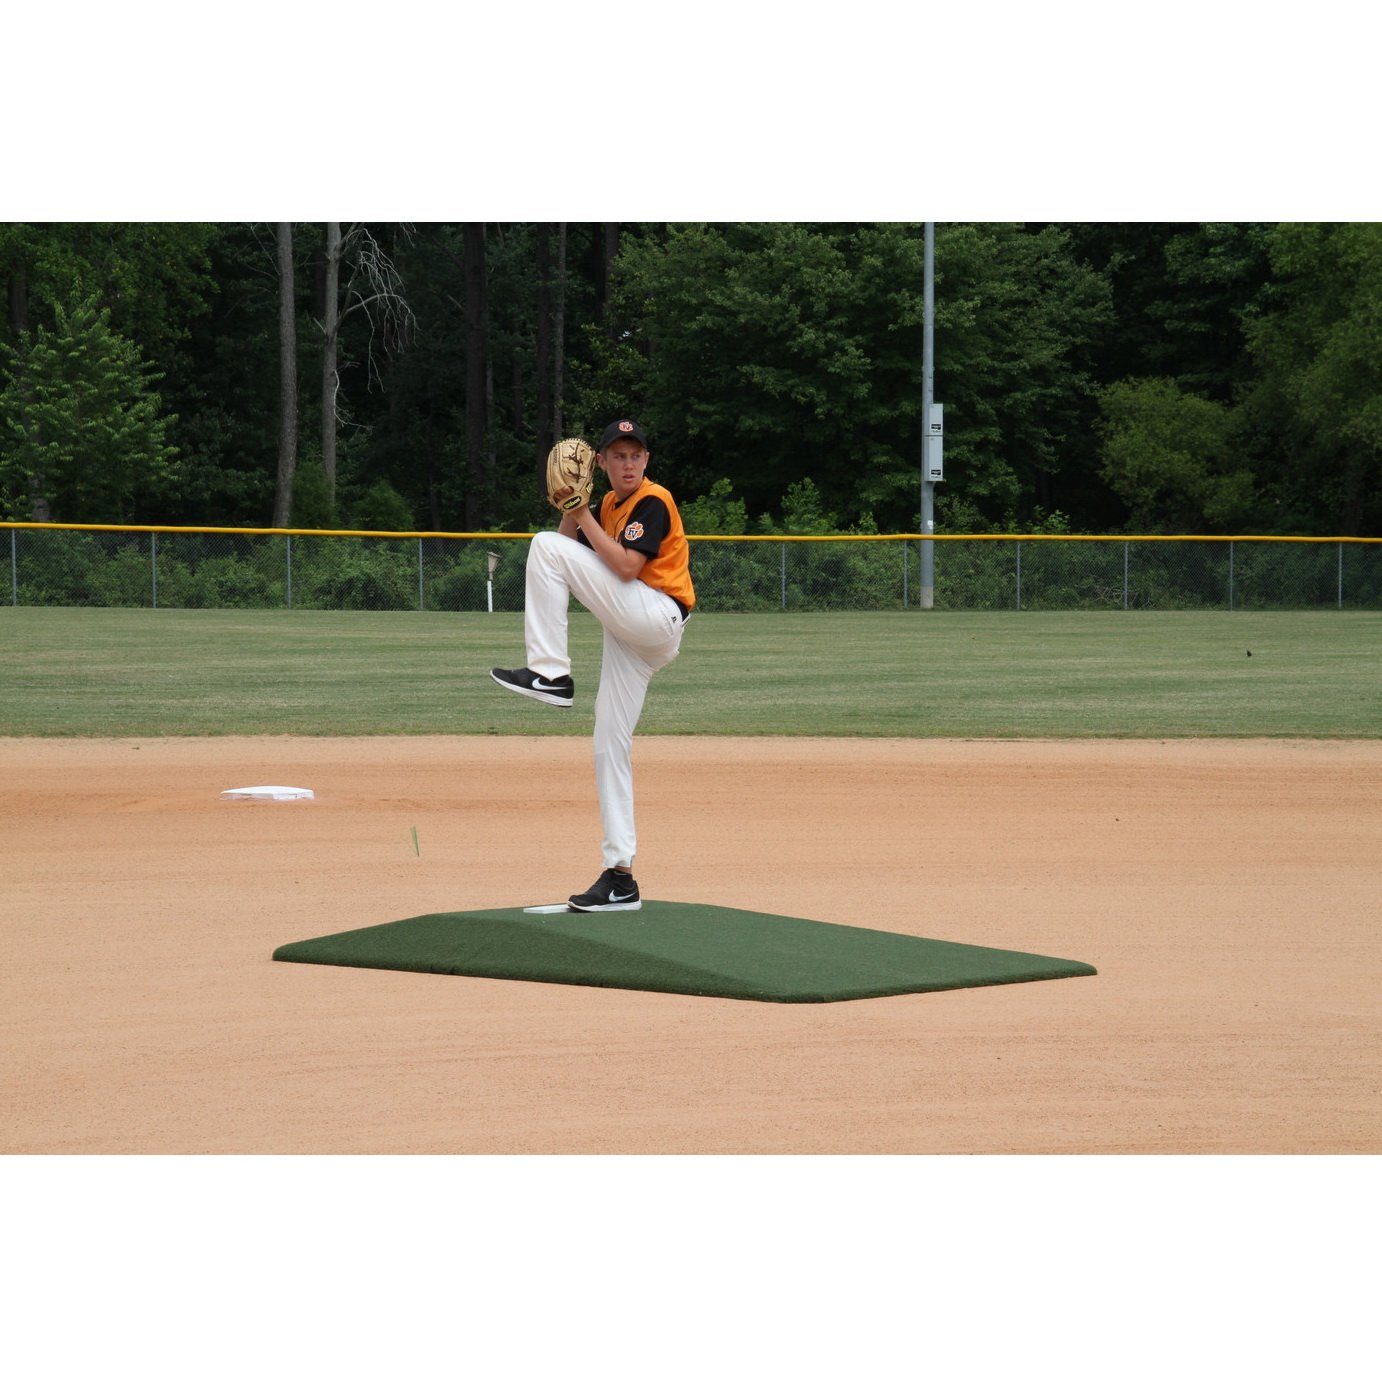 Portable Little League 'Junior' Game Pitching Mound - Pitch Pro Direct